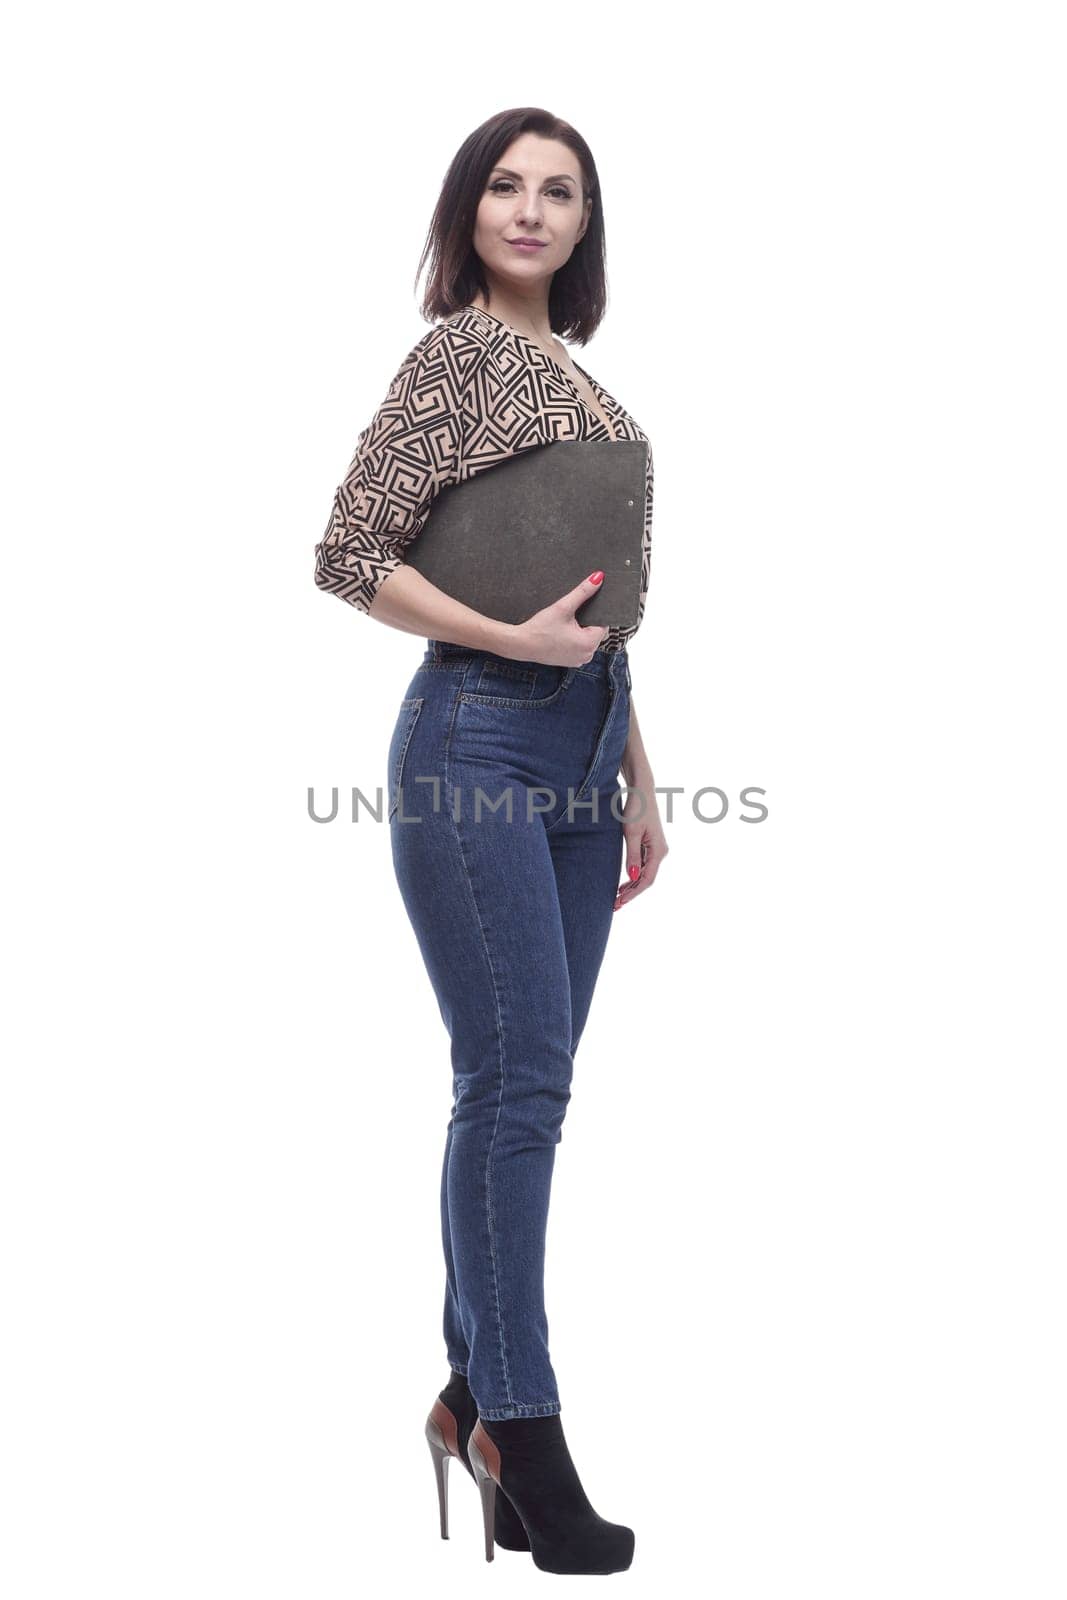 in full growth. Executive young woman with clipboard. isolated on a white background.